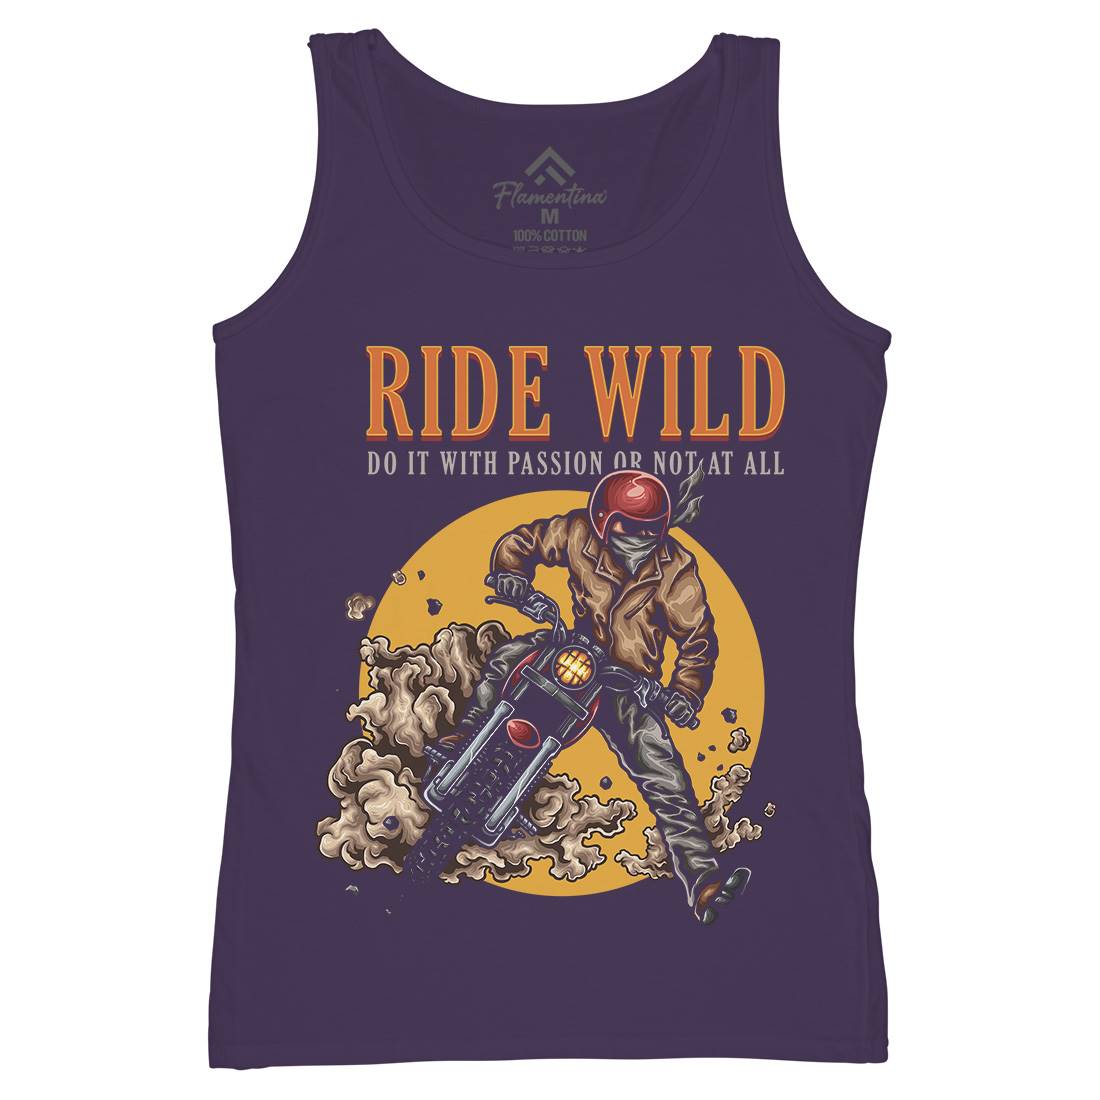 Ride Wild Womens Organic Tank Top Vest Motorcycles A460